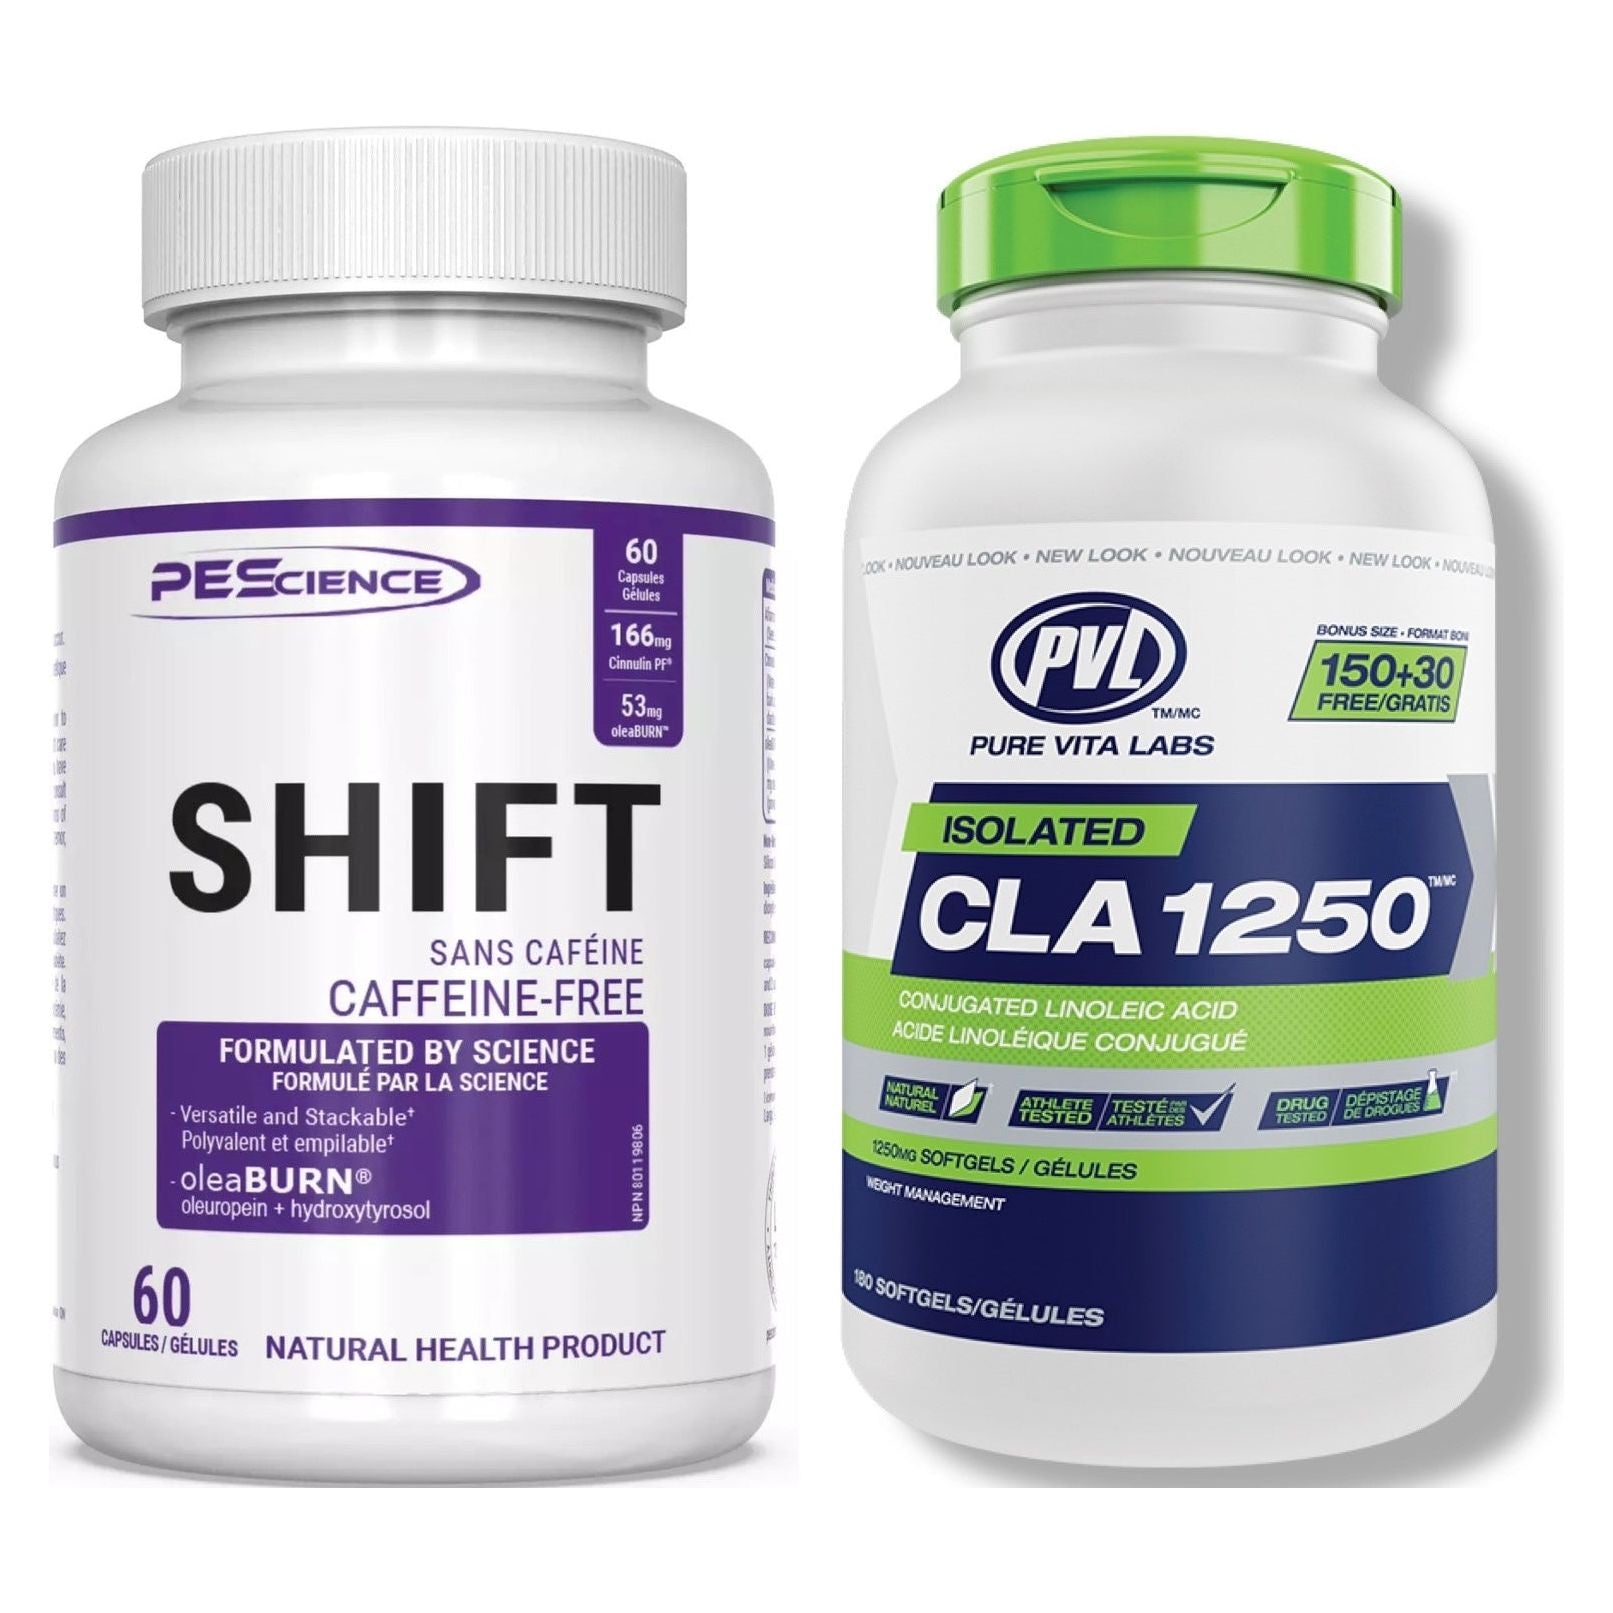 BUY SHIFT GET CLA $5 CLA BEST BY OCT 2023 PEScience Top Nutrition Canada